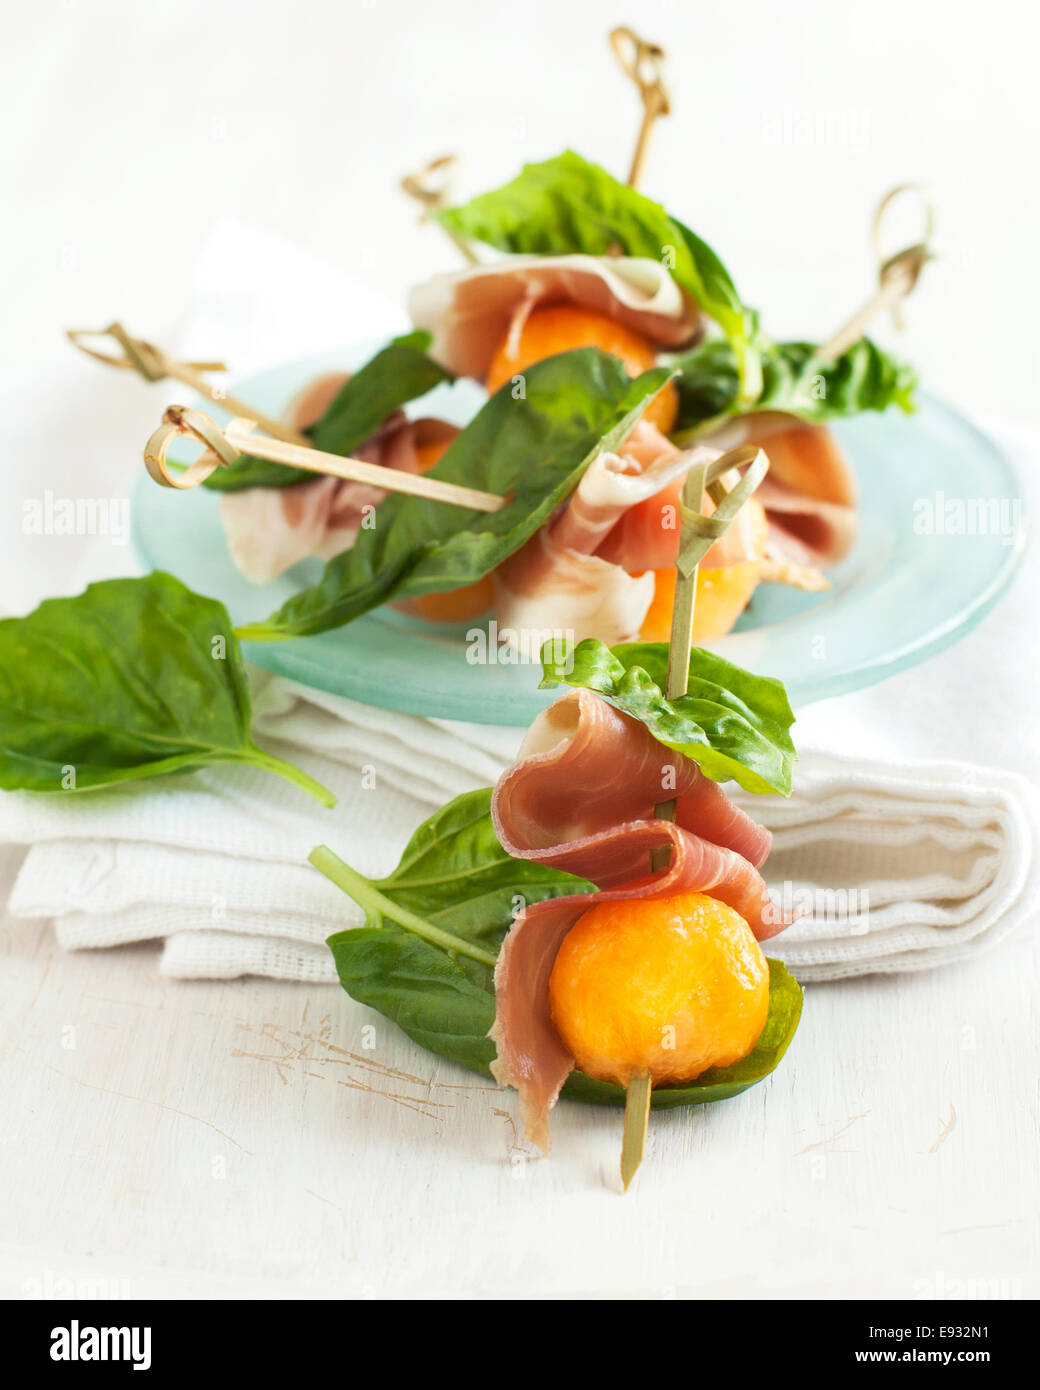 Appetizer with melon and prosciutto on skewers Stock Photo